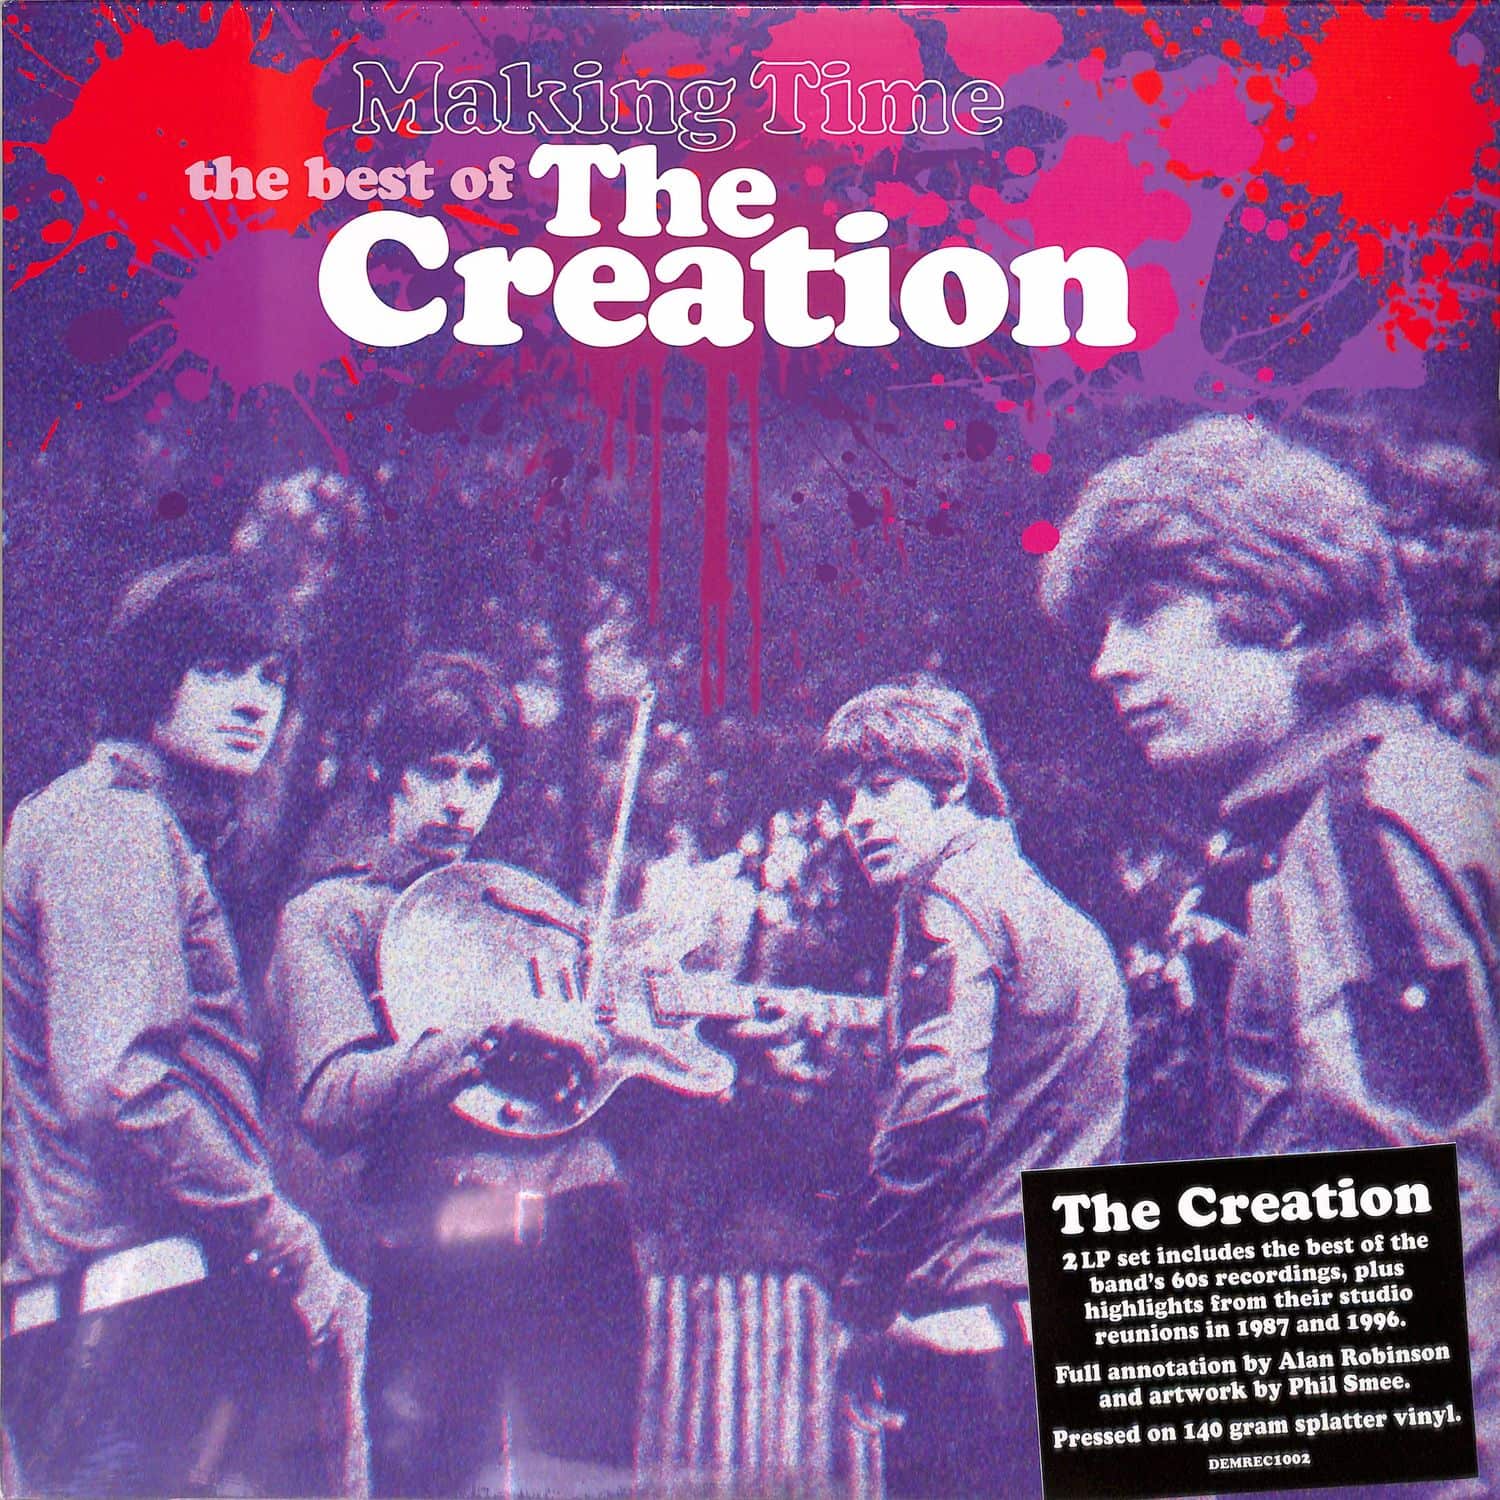 The Creation - MAKING TIME THE BEST OF 